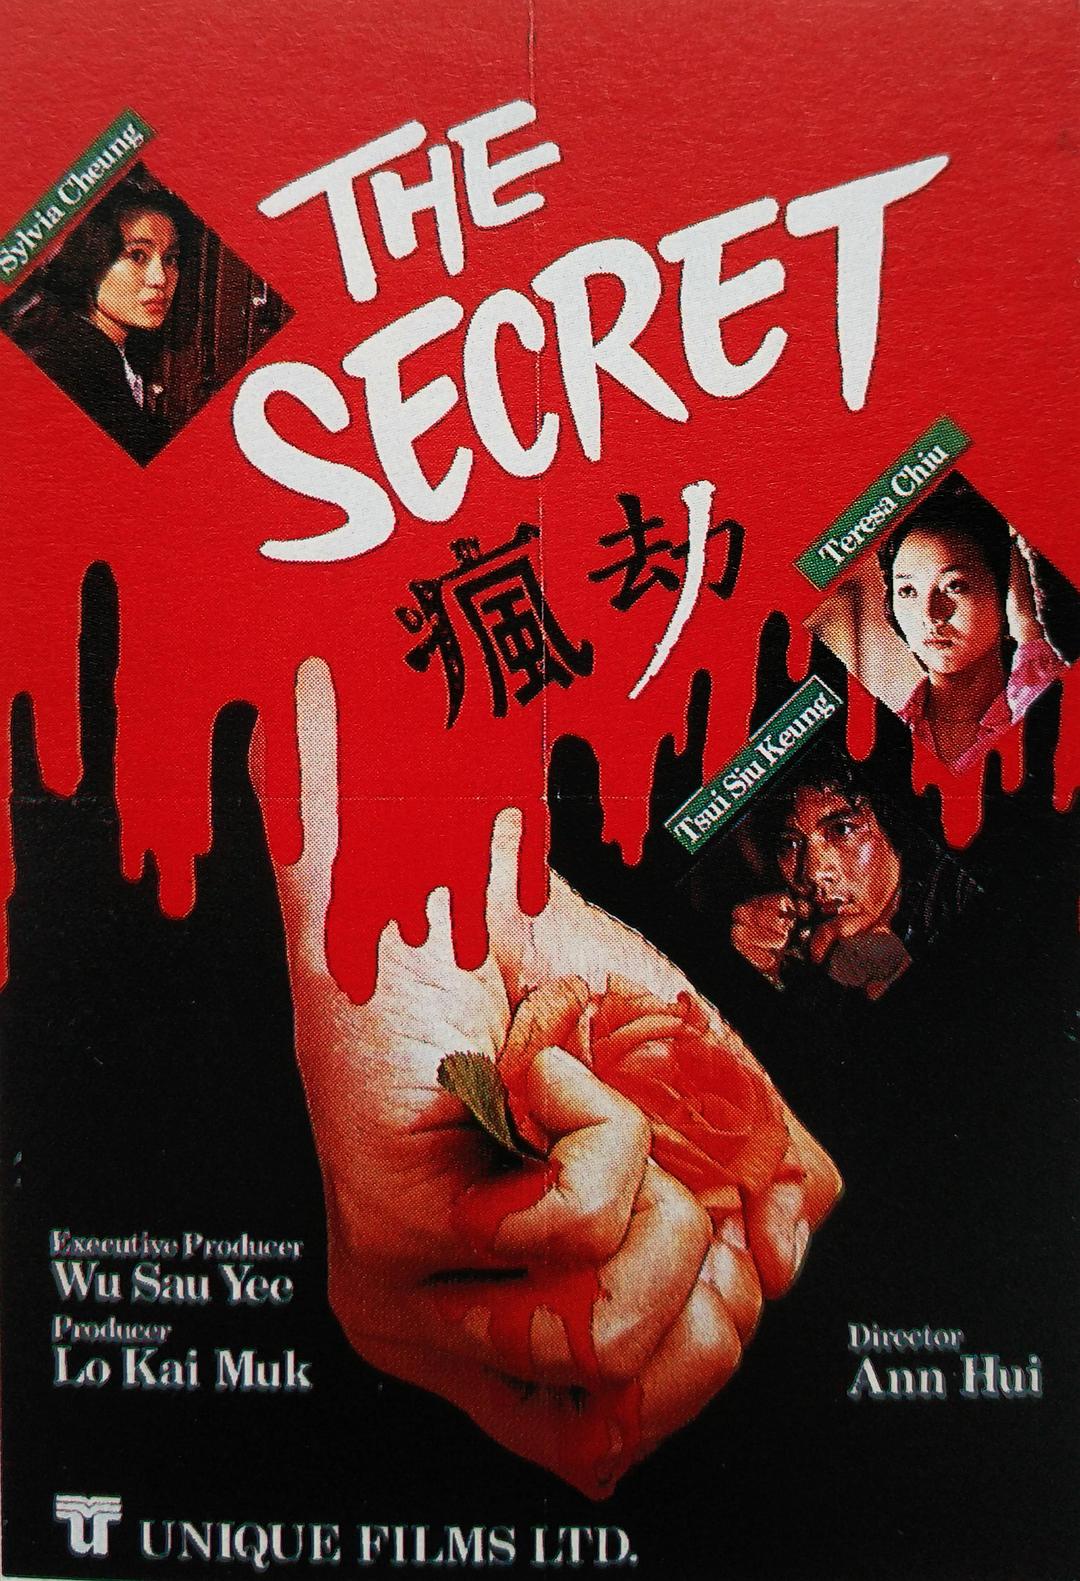  The.Secret.1979.SUBBED.1080p.BluRay.x264-BiPOLAR 6.56GB-1.png